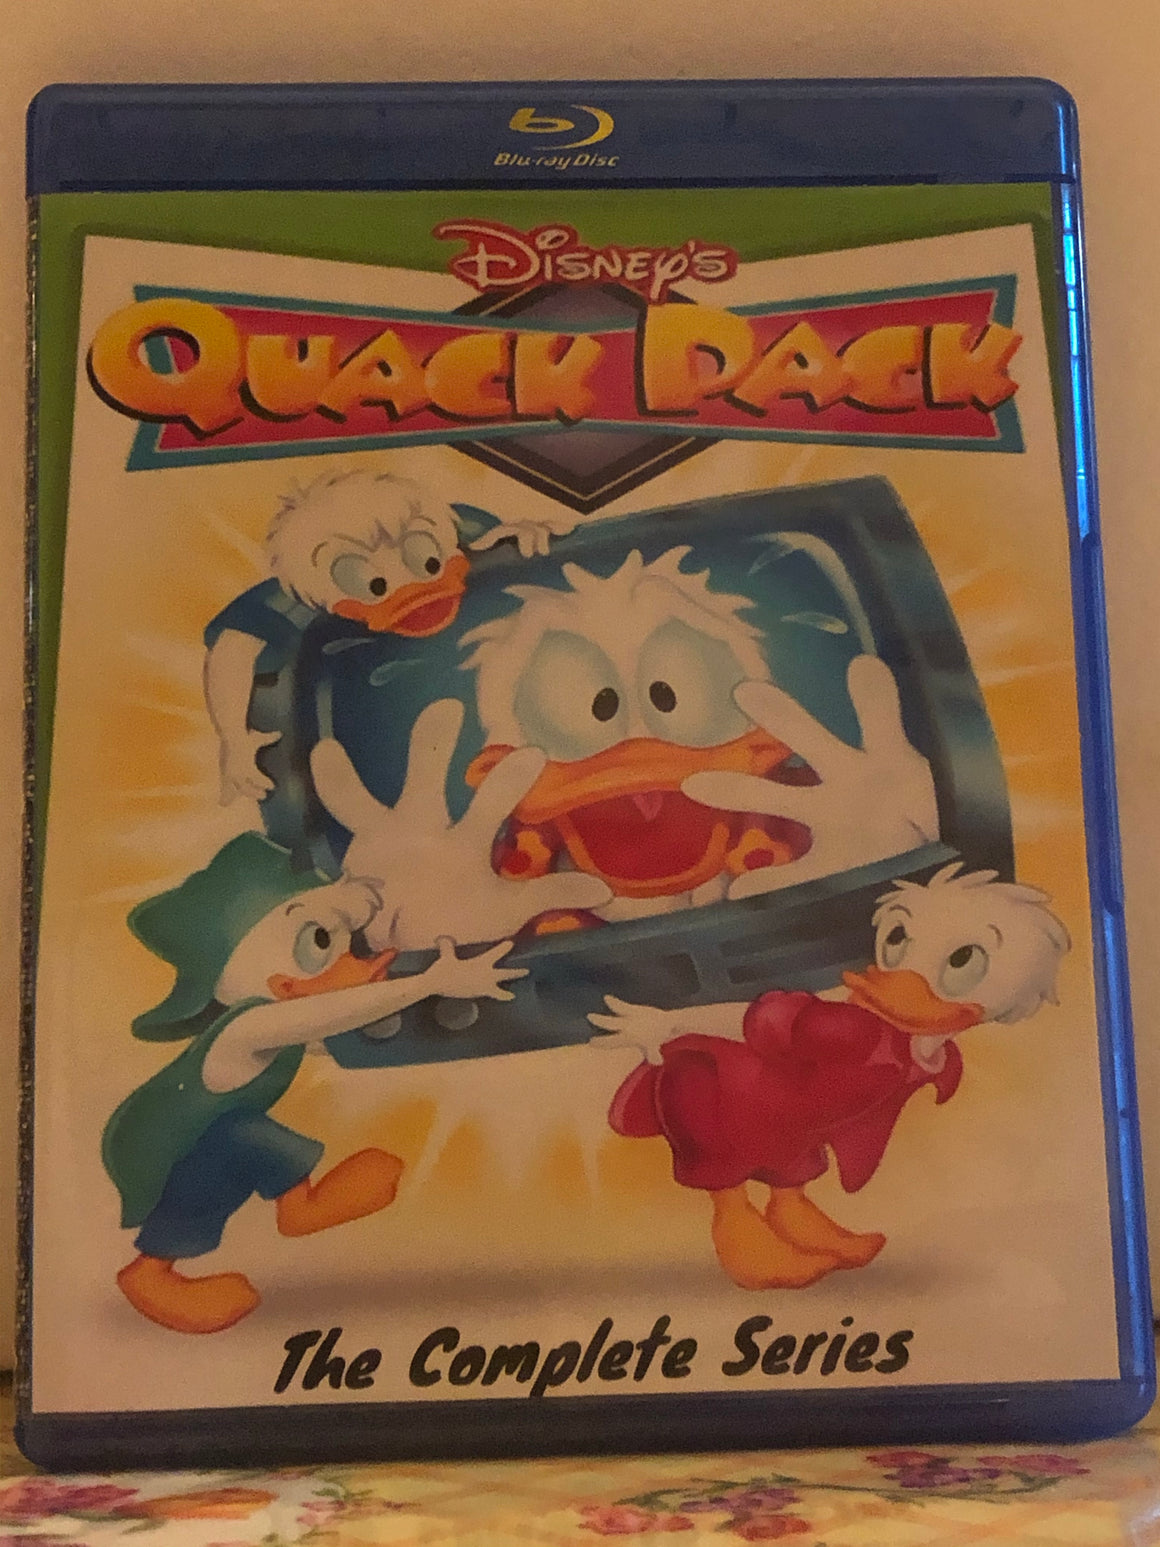 Disneys Quack Pack The Complete Series 39 Episodes On 3 Blu Ray Discs